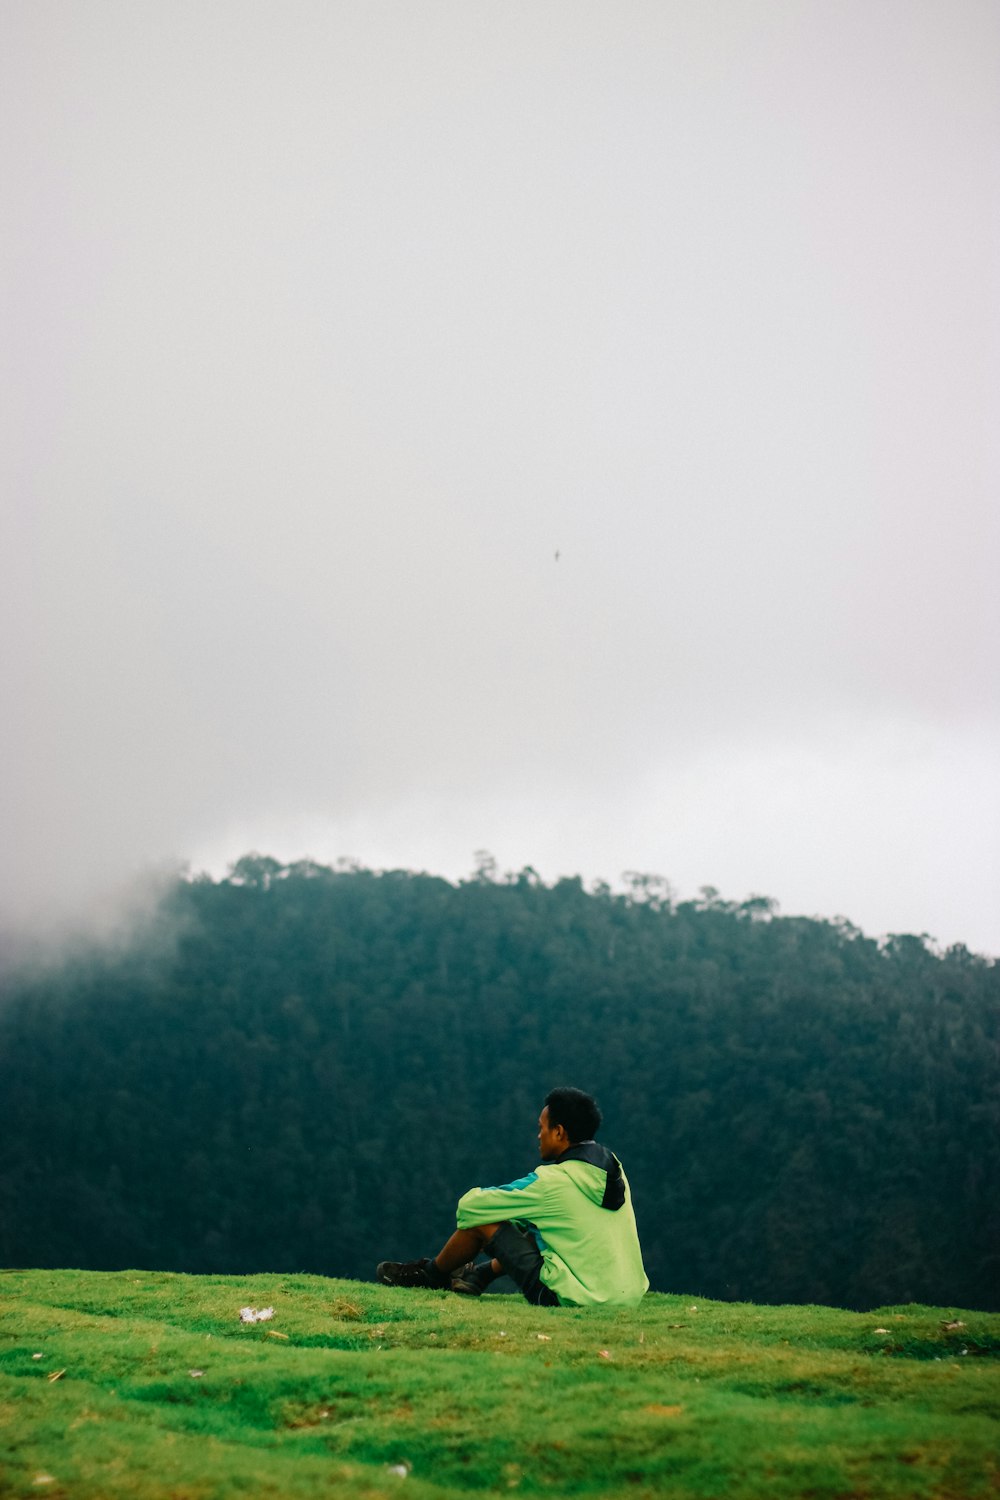 man in green shirt standing on green grass field during foggy weather